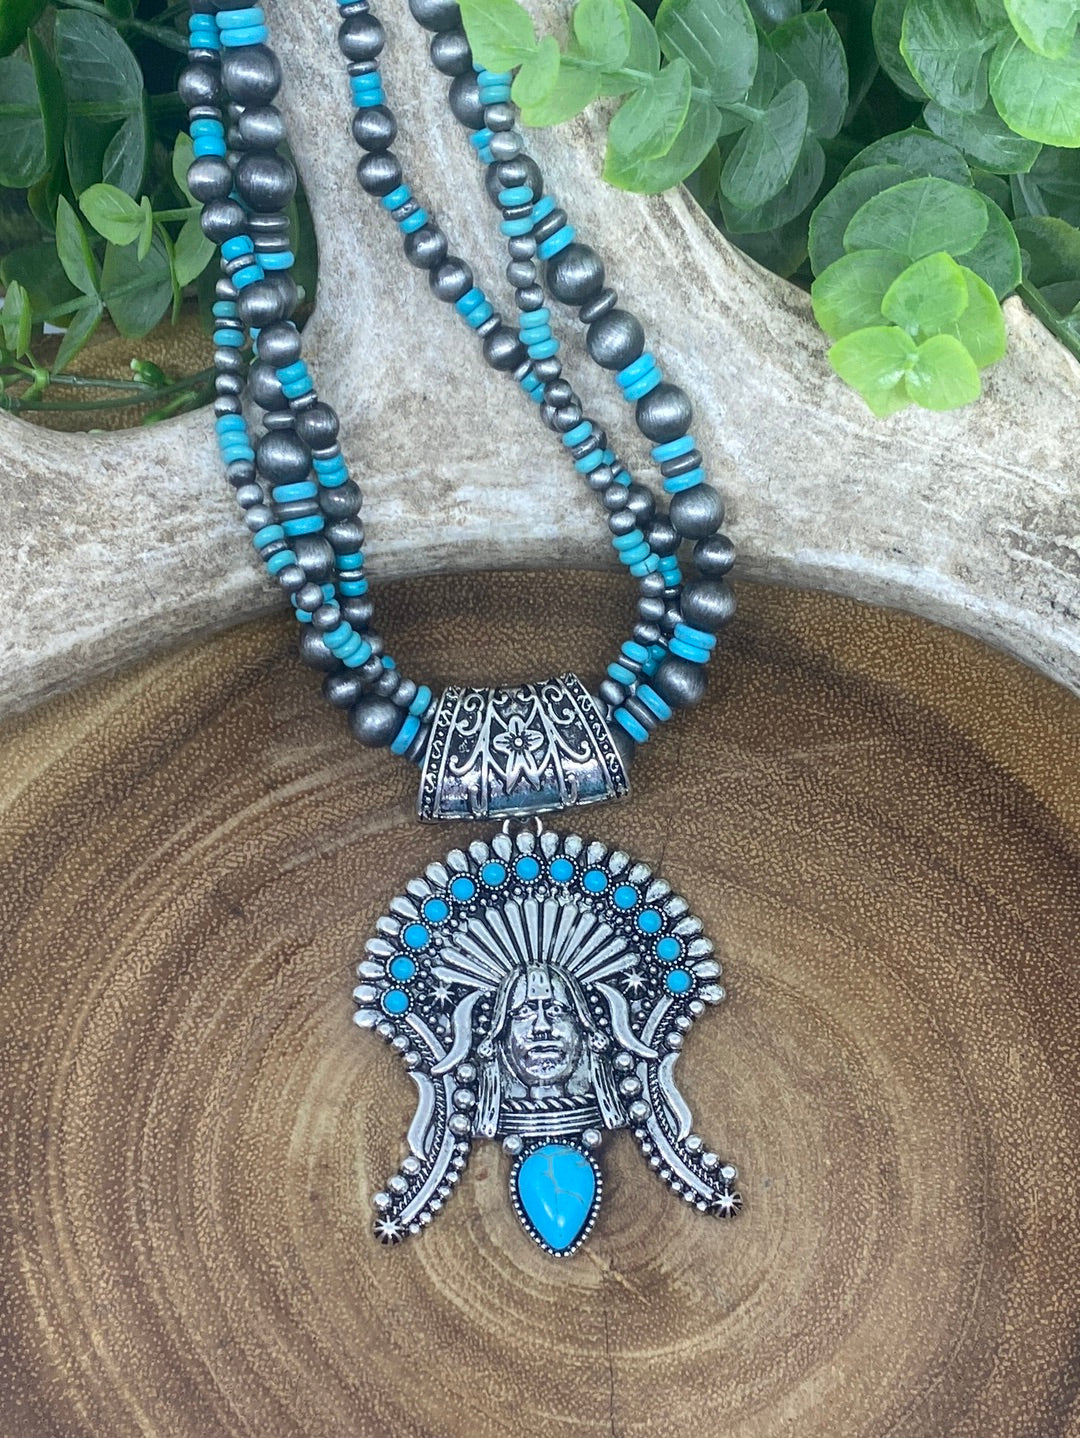 Tonopah 3 Strand Navajo & Turquoise Necklace with Indian Pendant